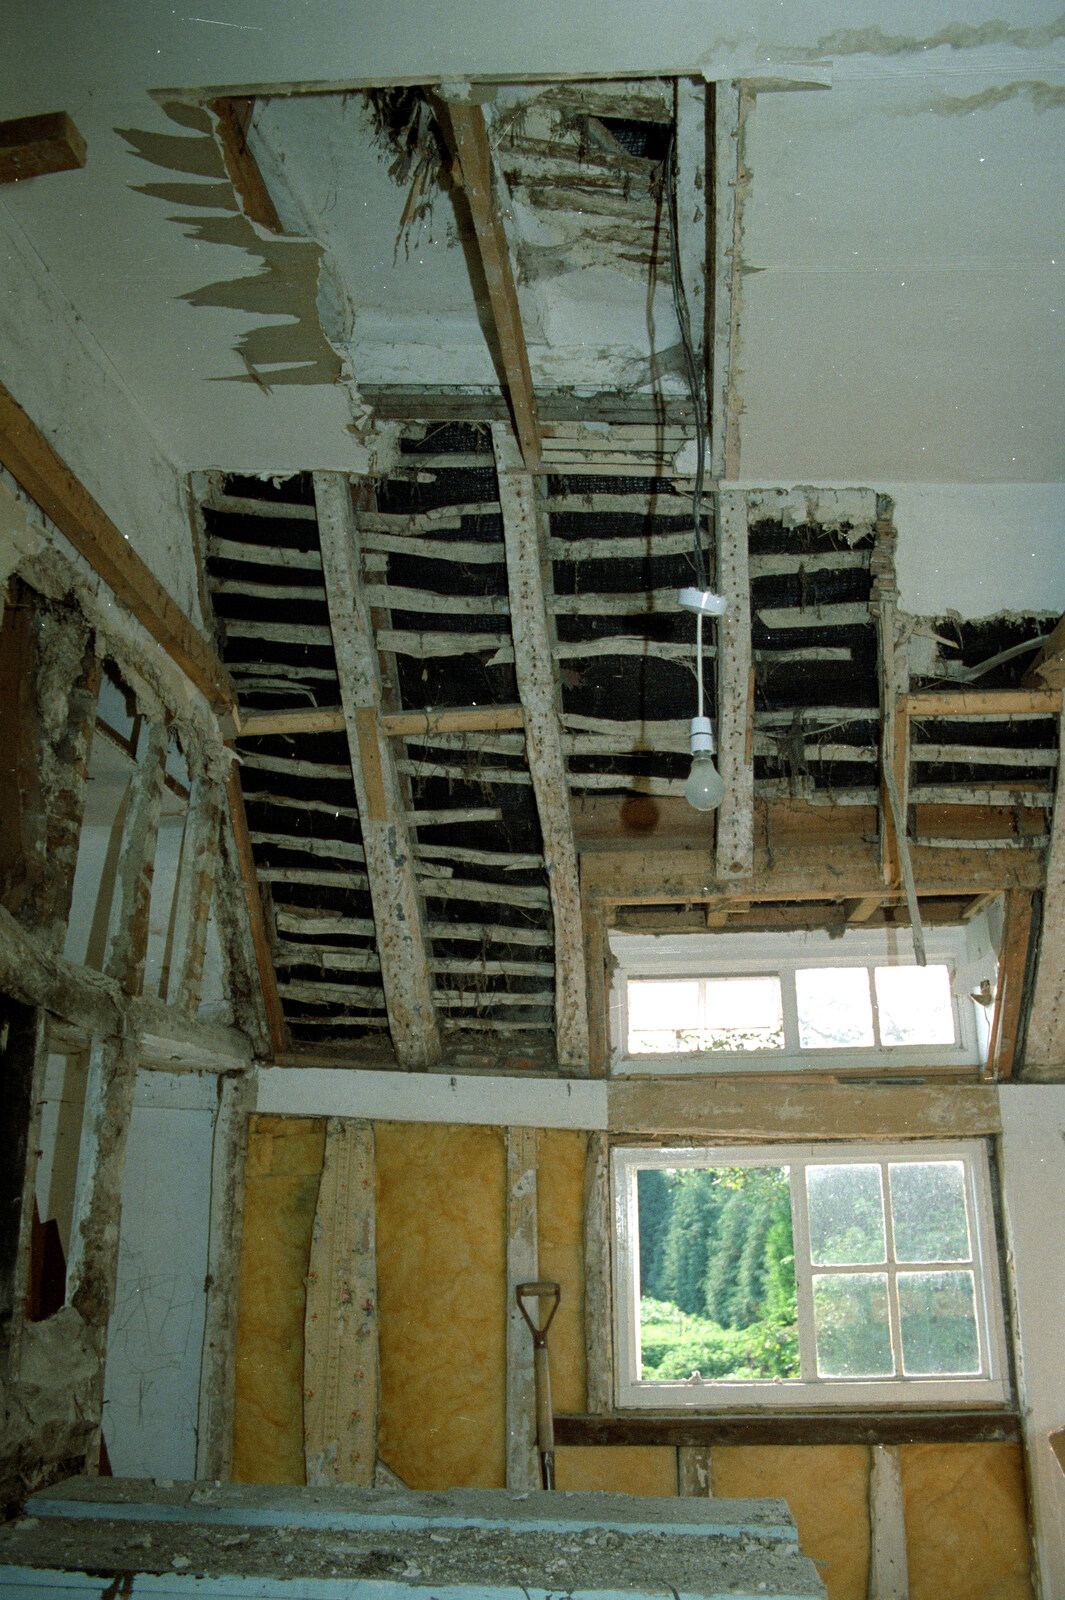 Removing a ceiling or two from Bedroom Demolition, Brome, Suffolk - 10th October 1994